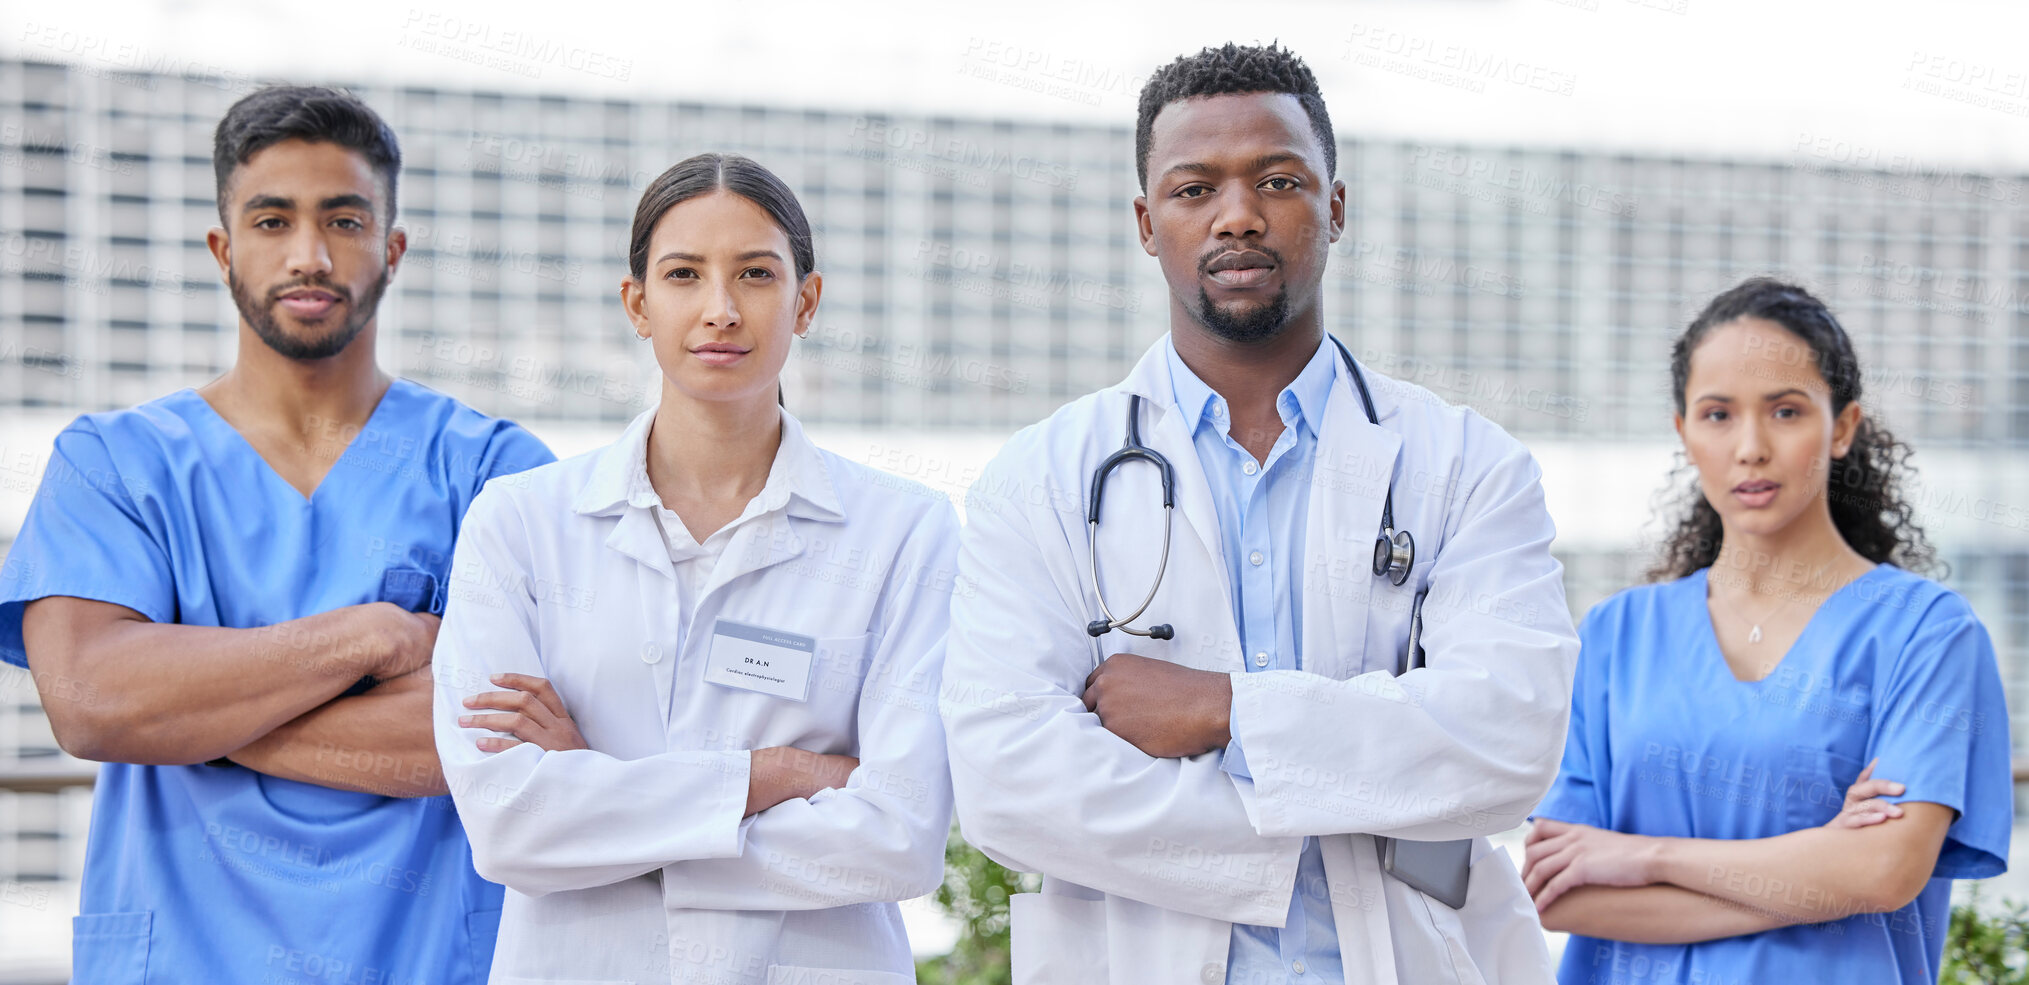 Buy stock photo Doctors, outdoor and confident portrait for medicine, medical service and healthcare solidarity. Collaboration, unity and teamwork or trust in staff or employees, diversity and proud of insurance